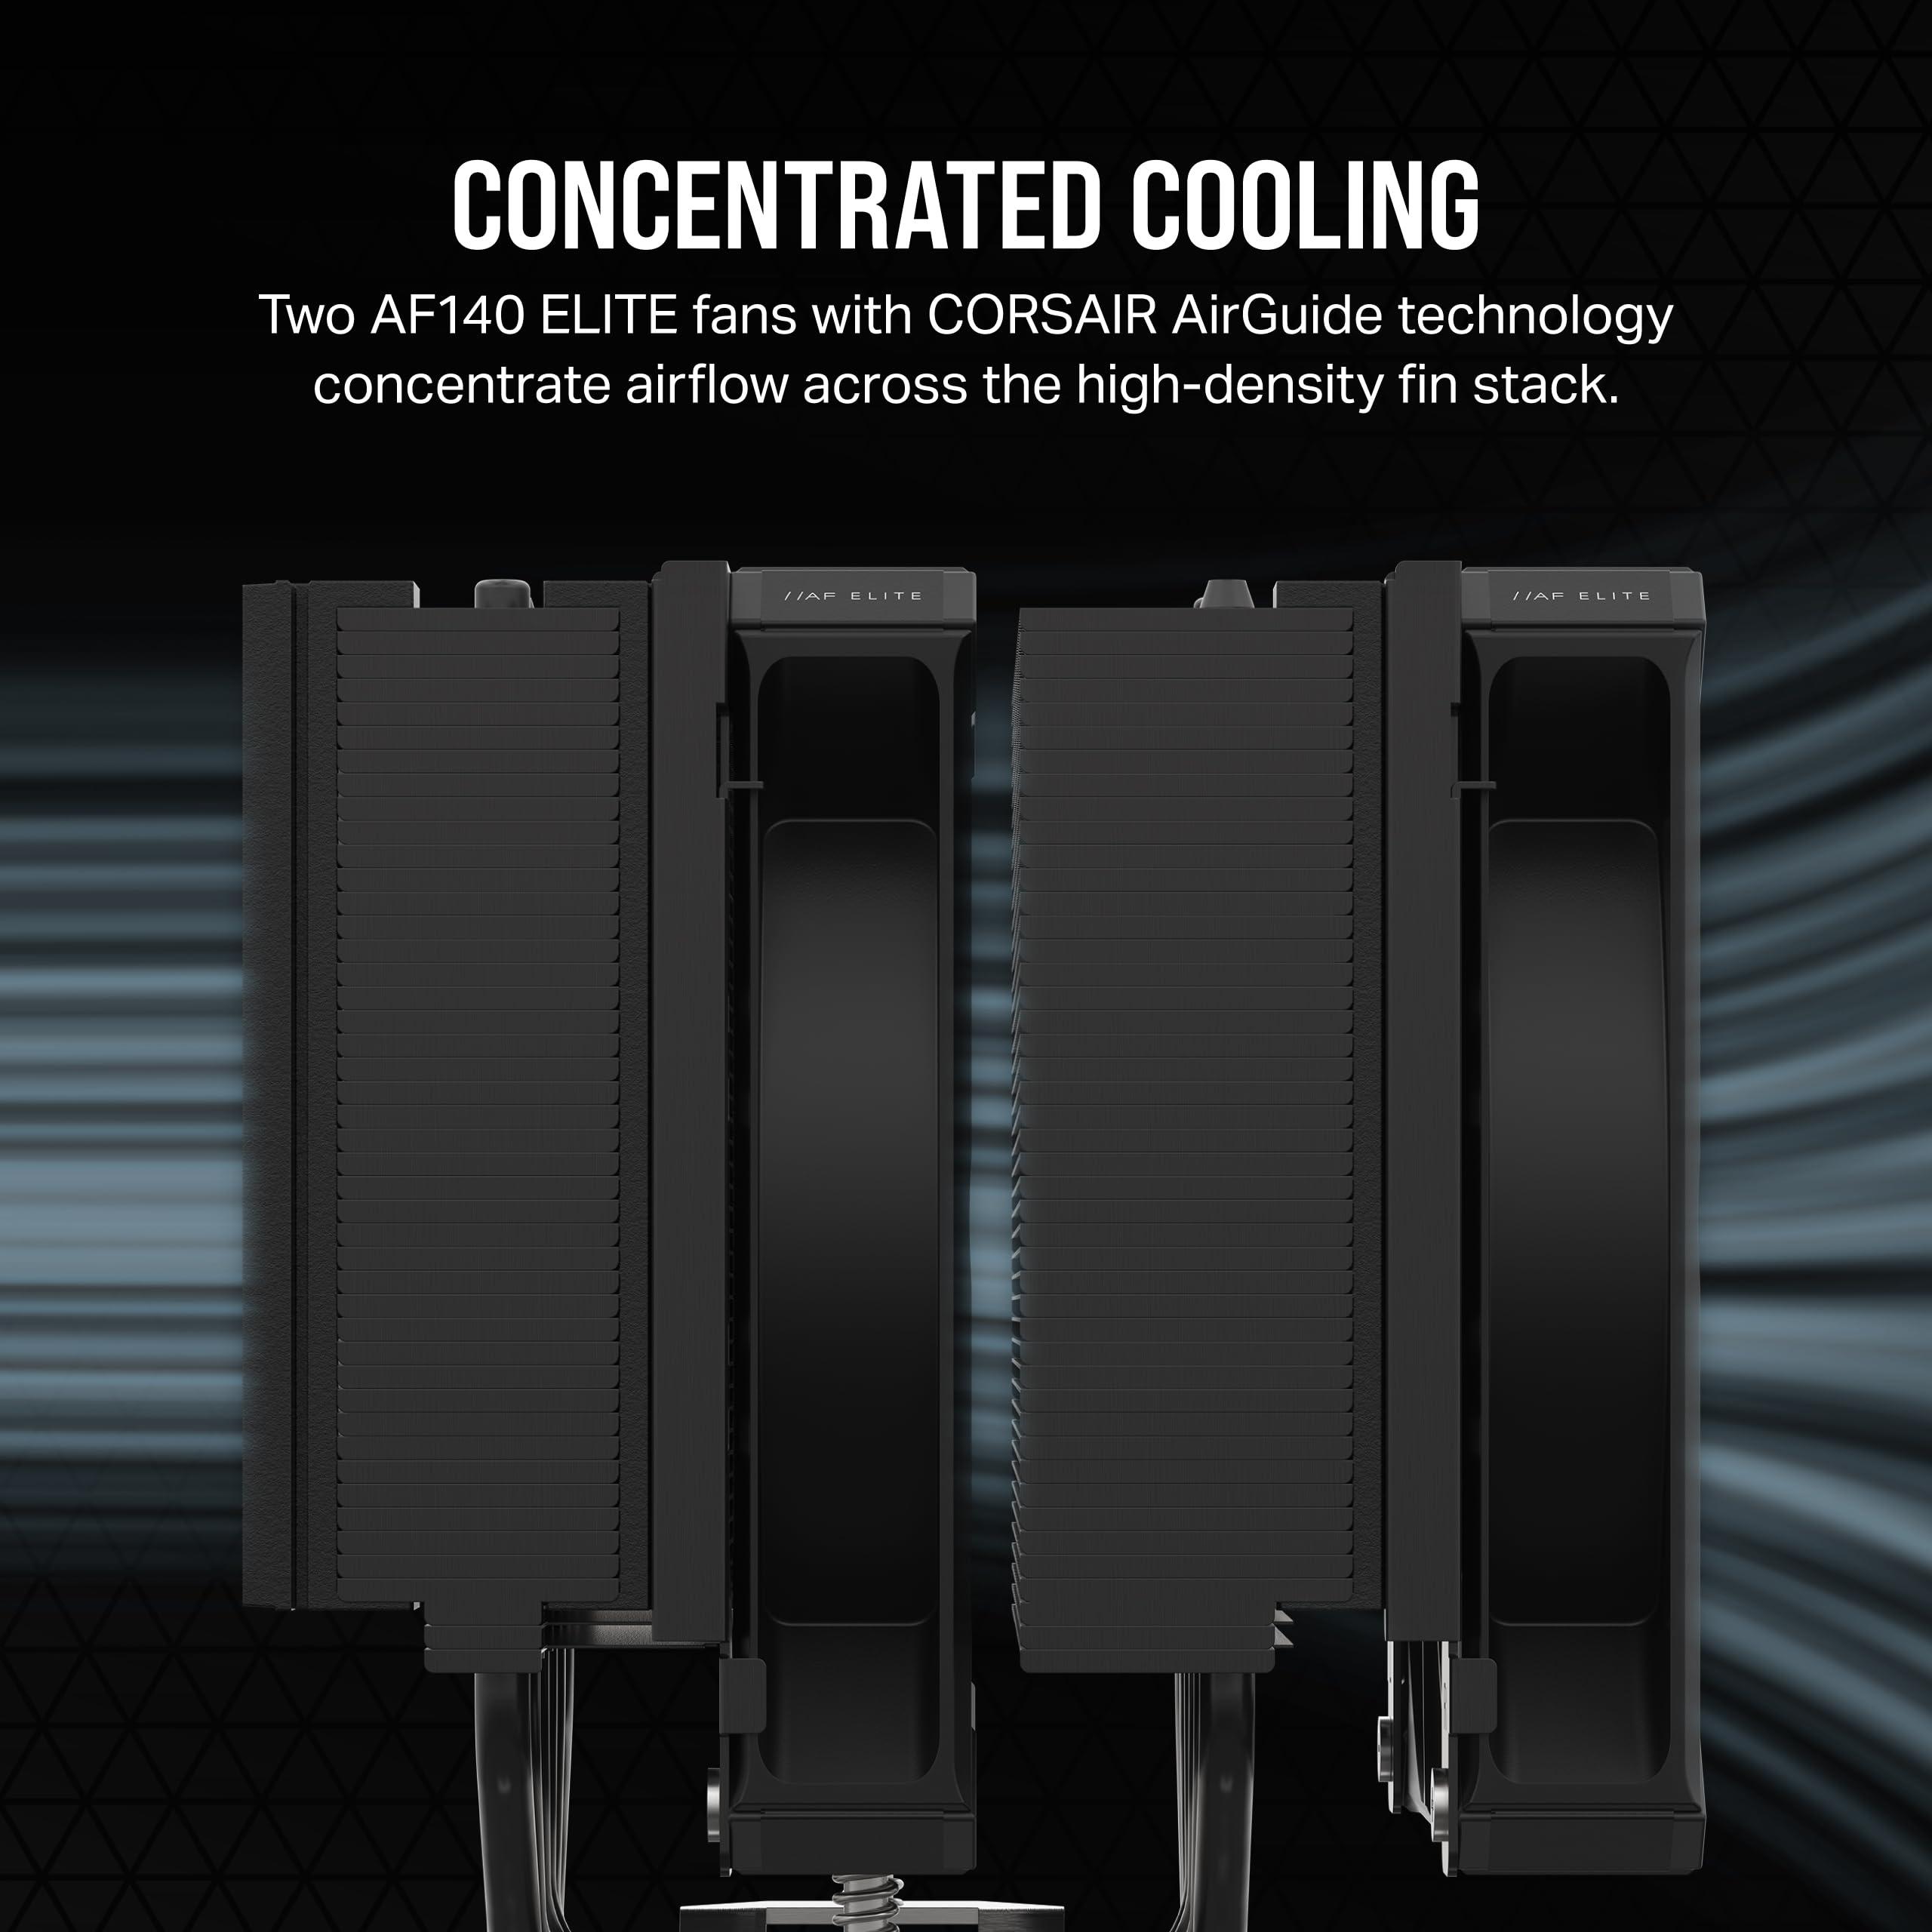 CORSAIR A115 High-Performance Tower CPU Air Cooler — Cools up to 270W TDP - Slide-and-Lock Fan Mount - Two Corsair AF140 Elite Fans - Easy to Install - Pre-Applied Thermal Paste — Black